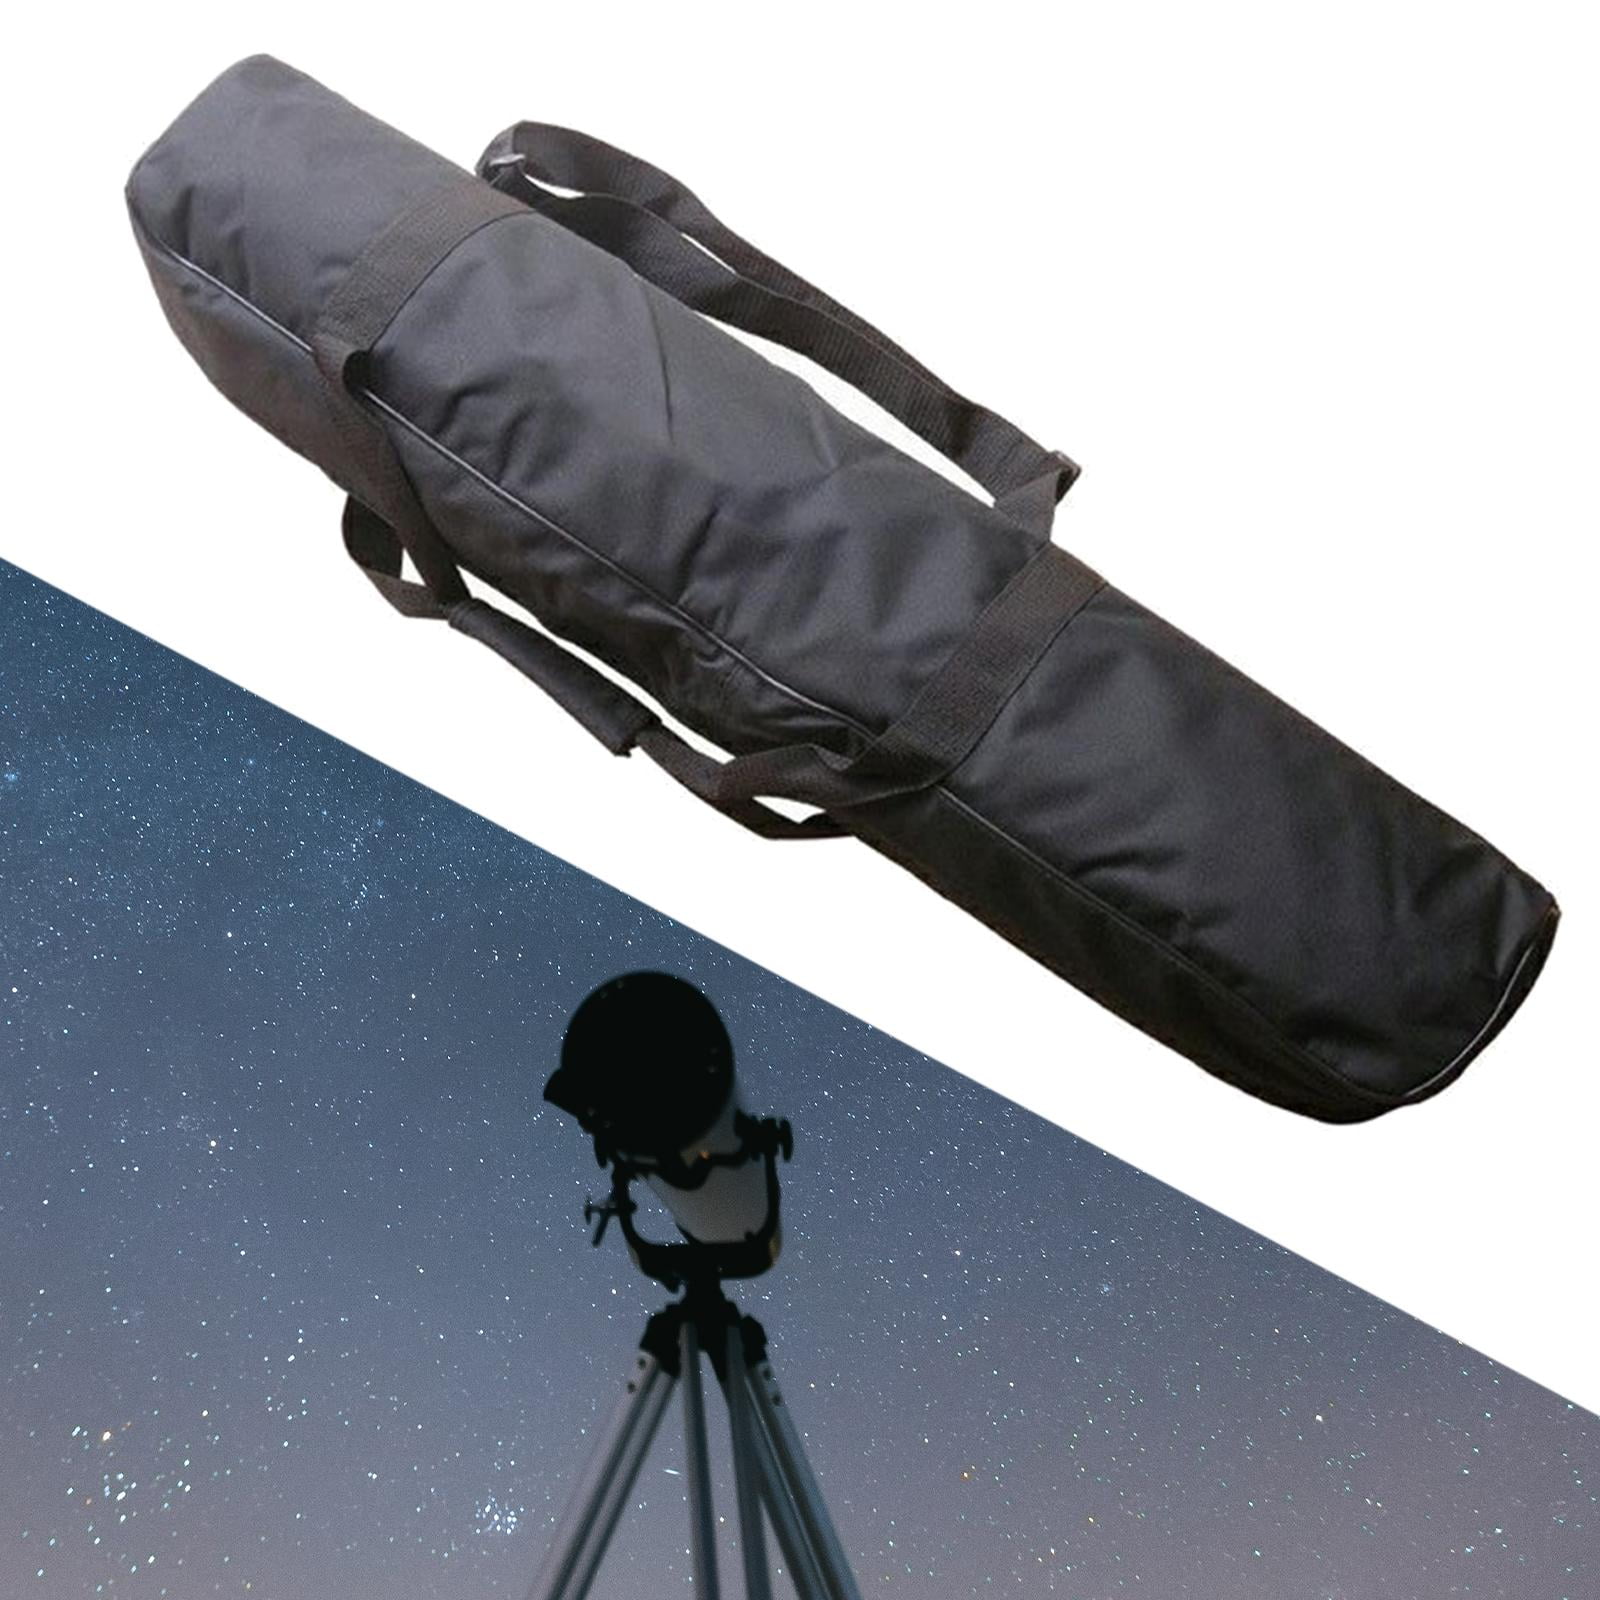 Padded Telescope Case Photography Equipment with Strap